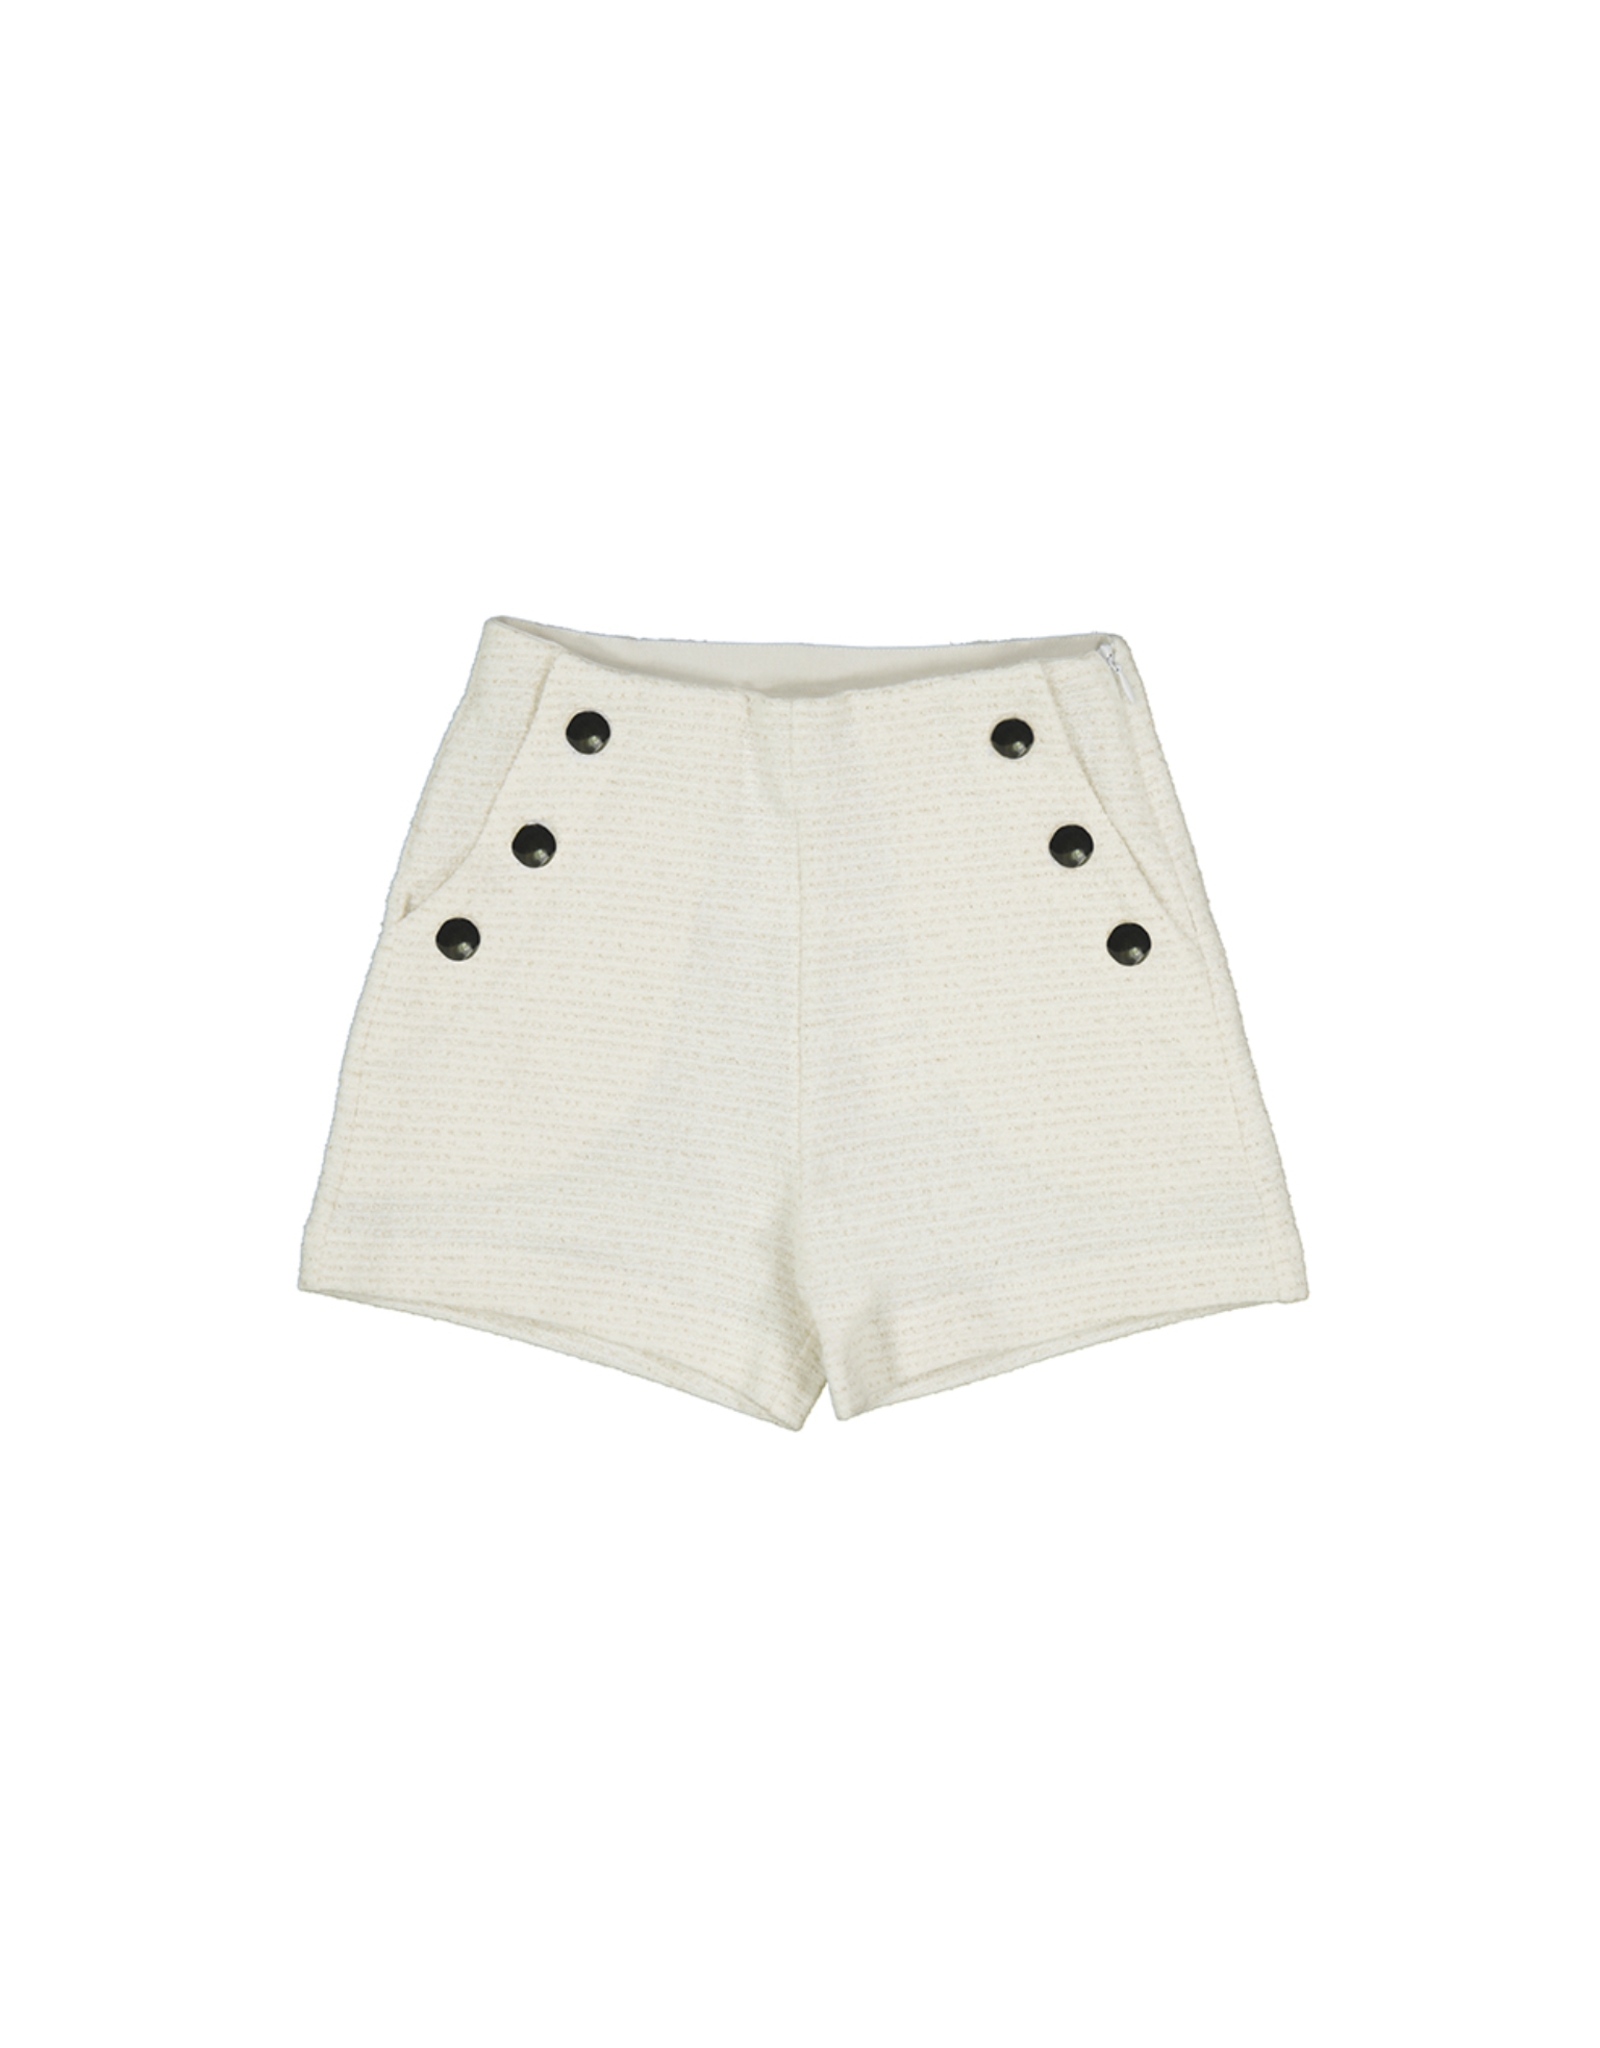 Mayoral White Glitter Shorts w/ Gold Buttons